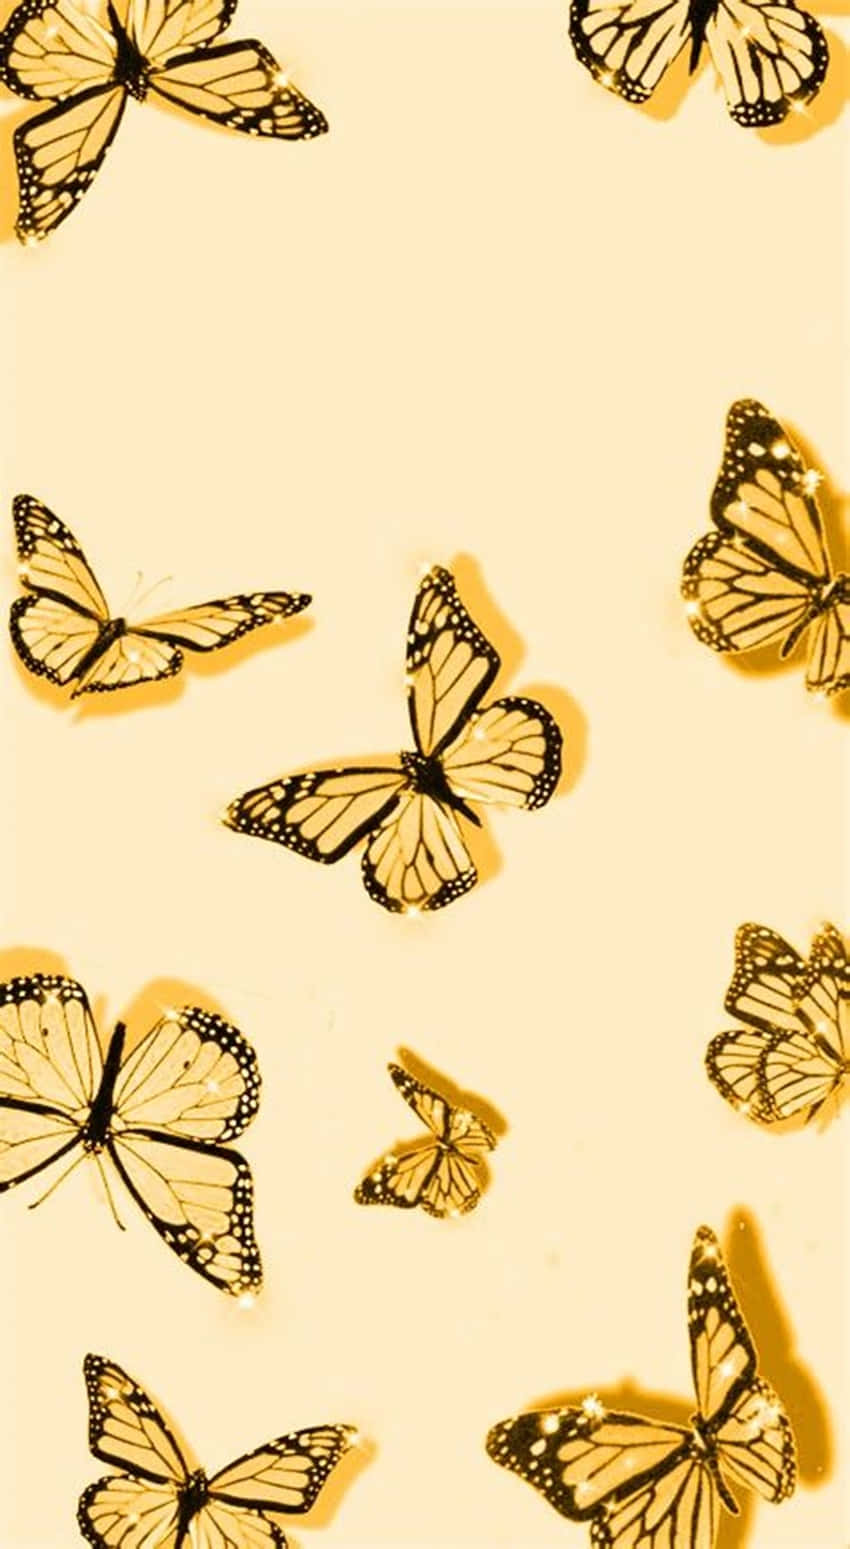 Look How Cute These Yellow Butterflies Are Wallpaper